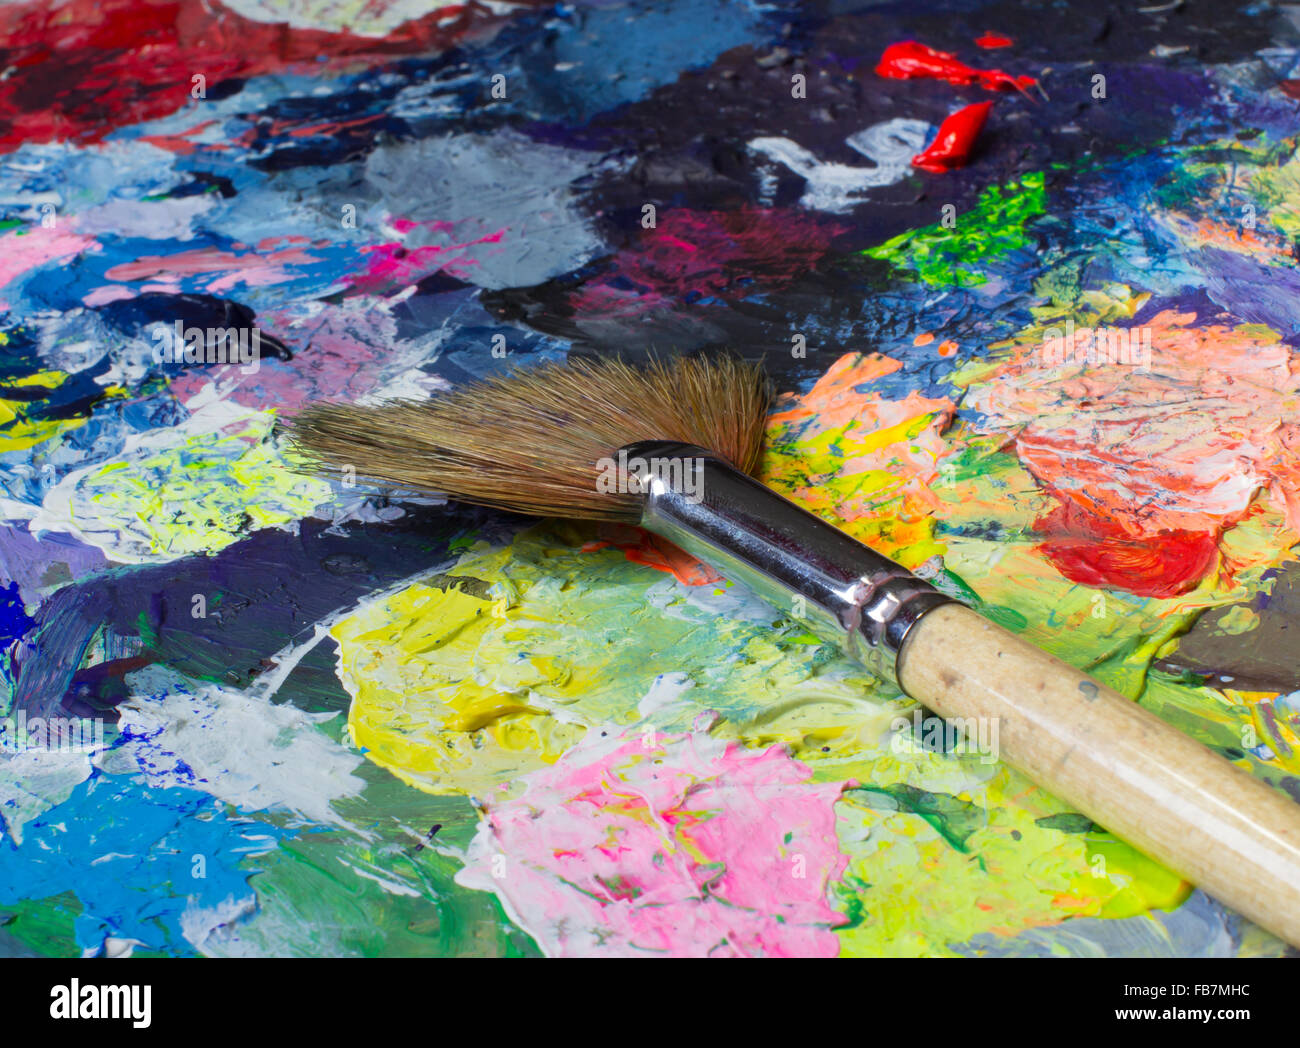 Art tools set fan paintbrush hi-res stock photography and images - Alamy